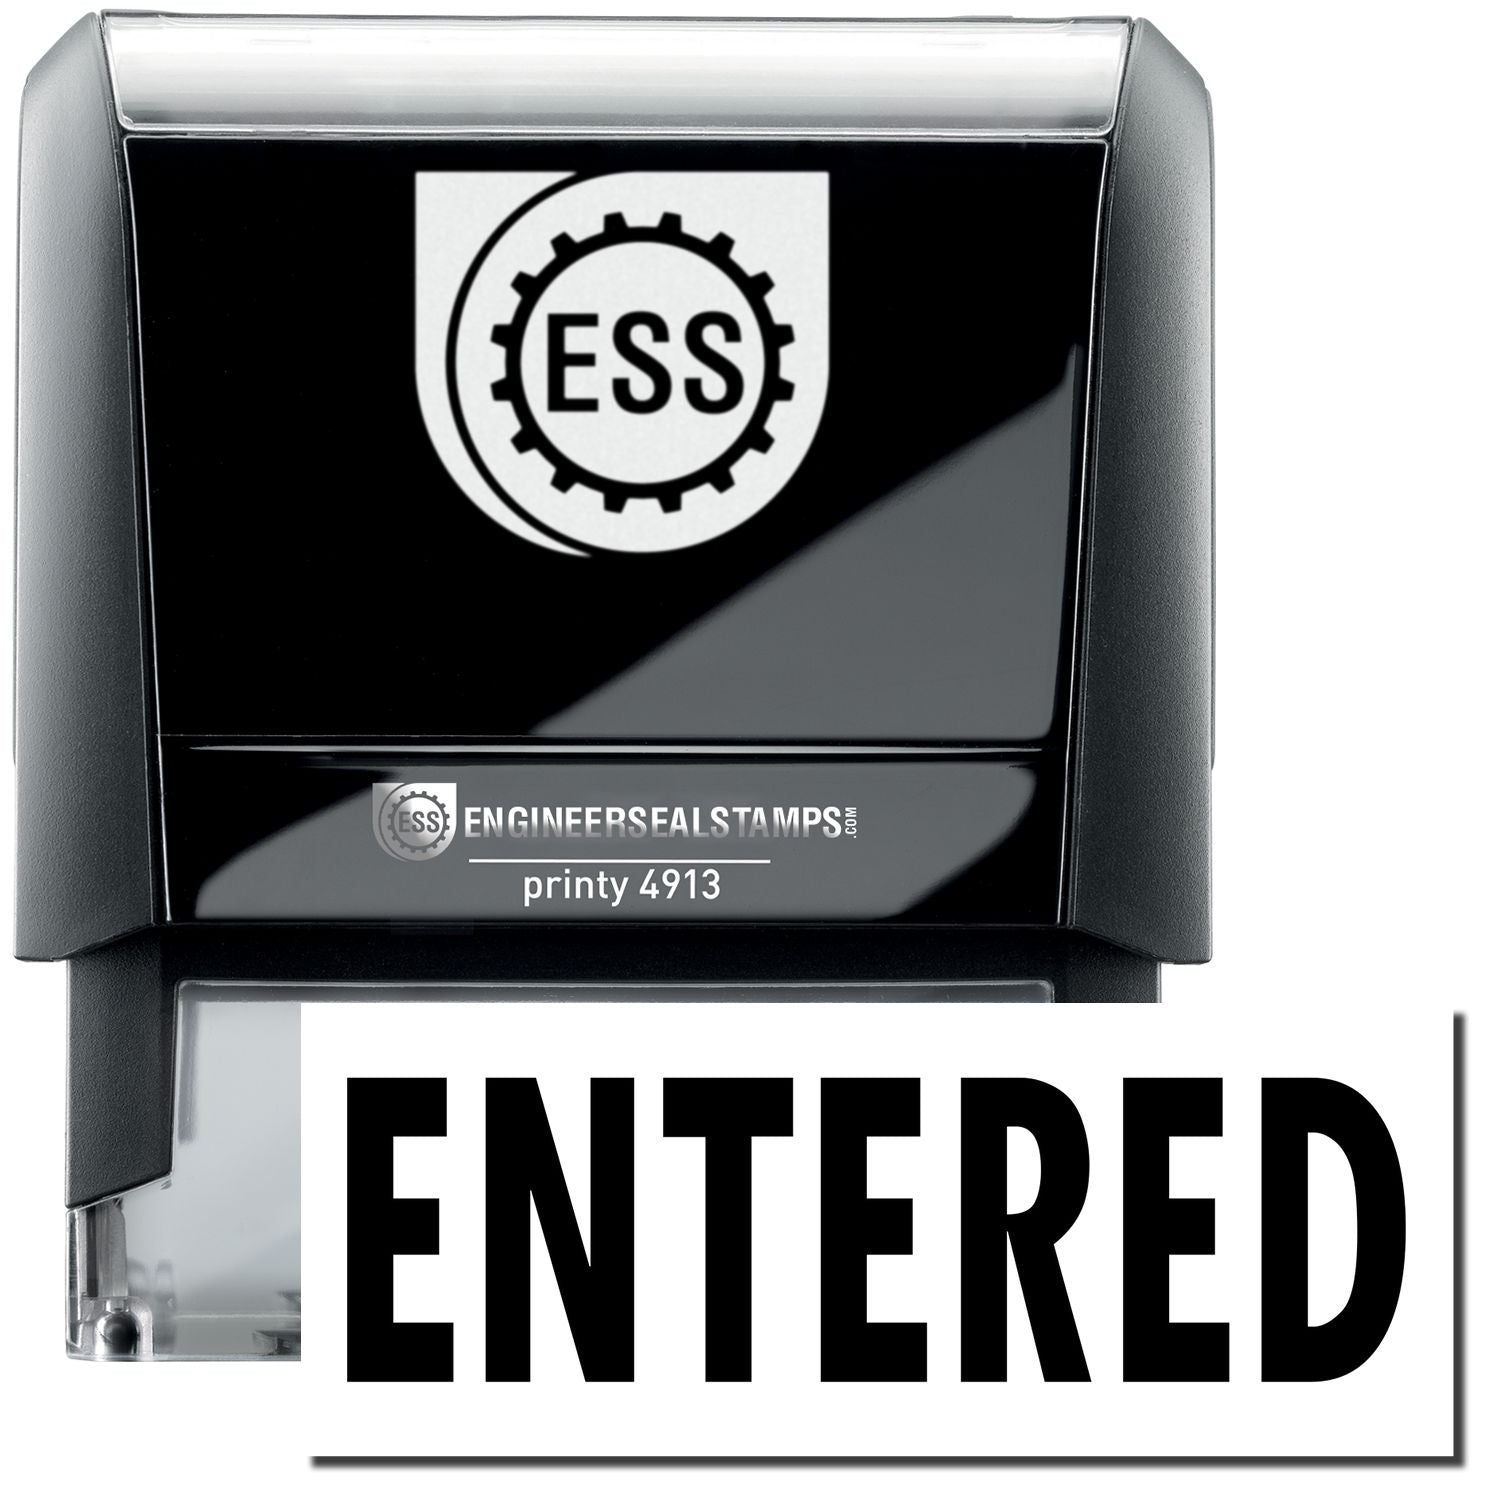 A self-inking stamp with a stamped image showing how the text "ENTERED" in a large bold font is displayed by it.